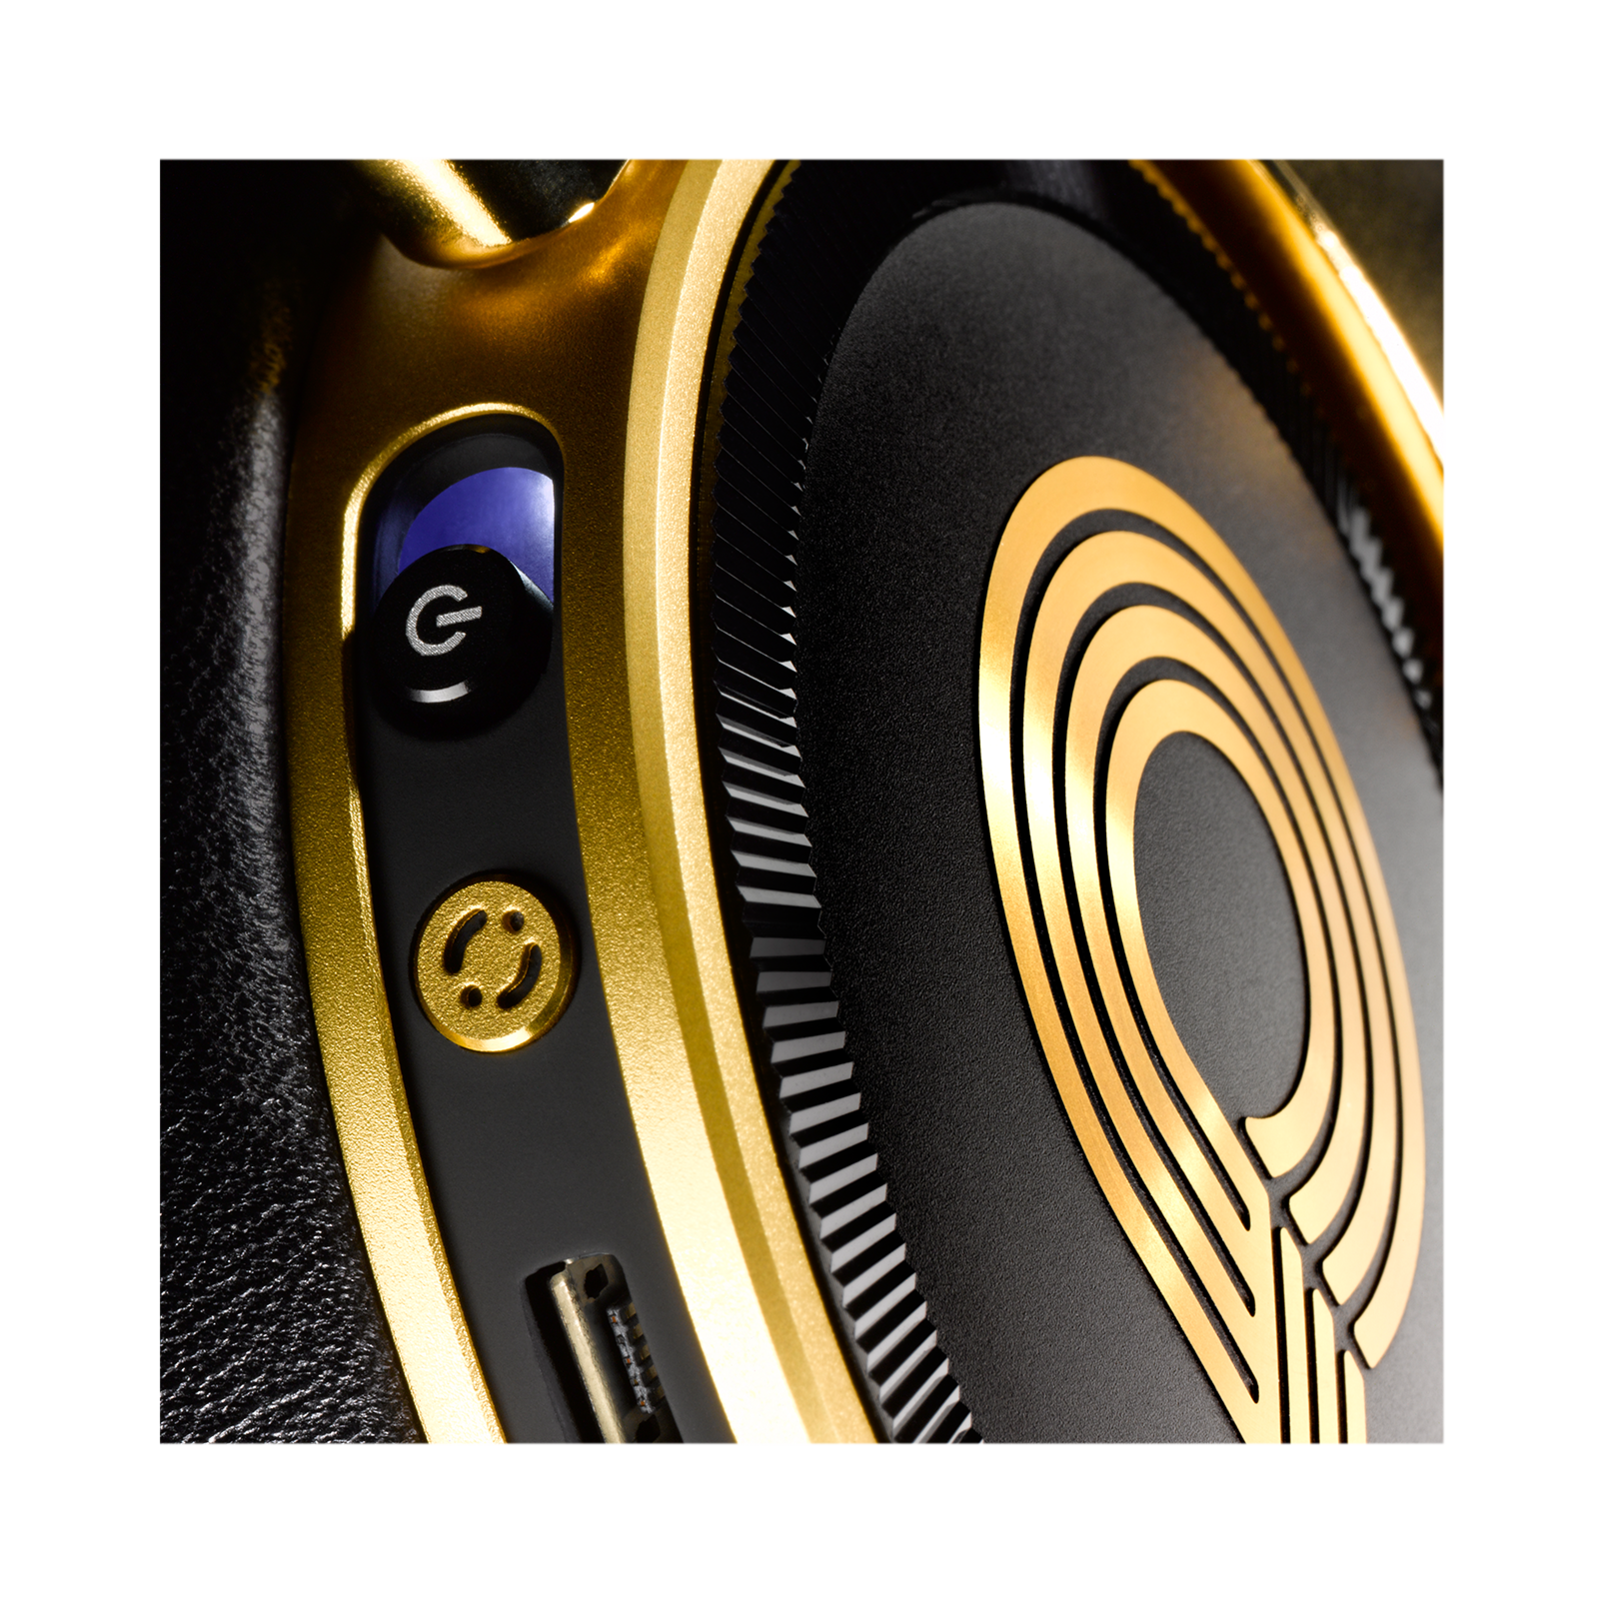 N90Q - Gold - Reference class auto-calibrating noise-cancelling headphones - Detailshot 7